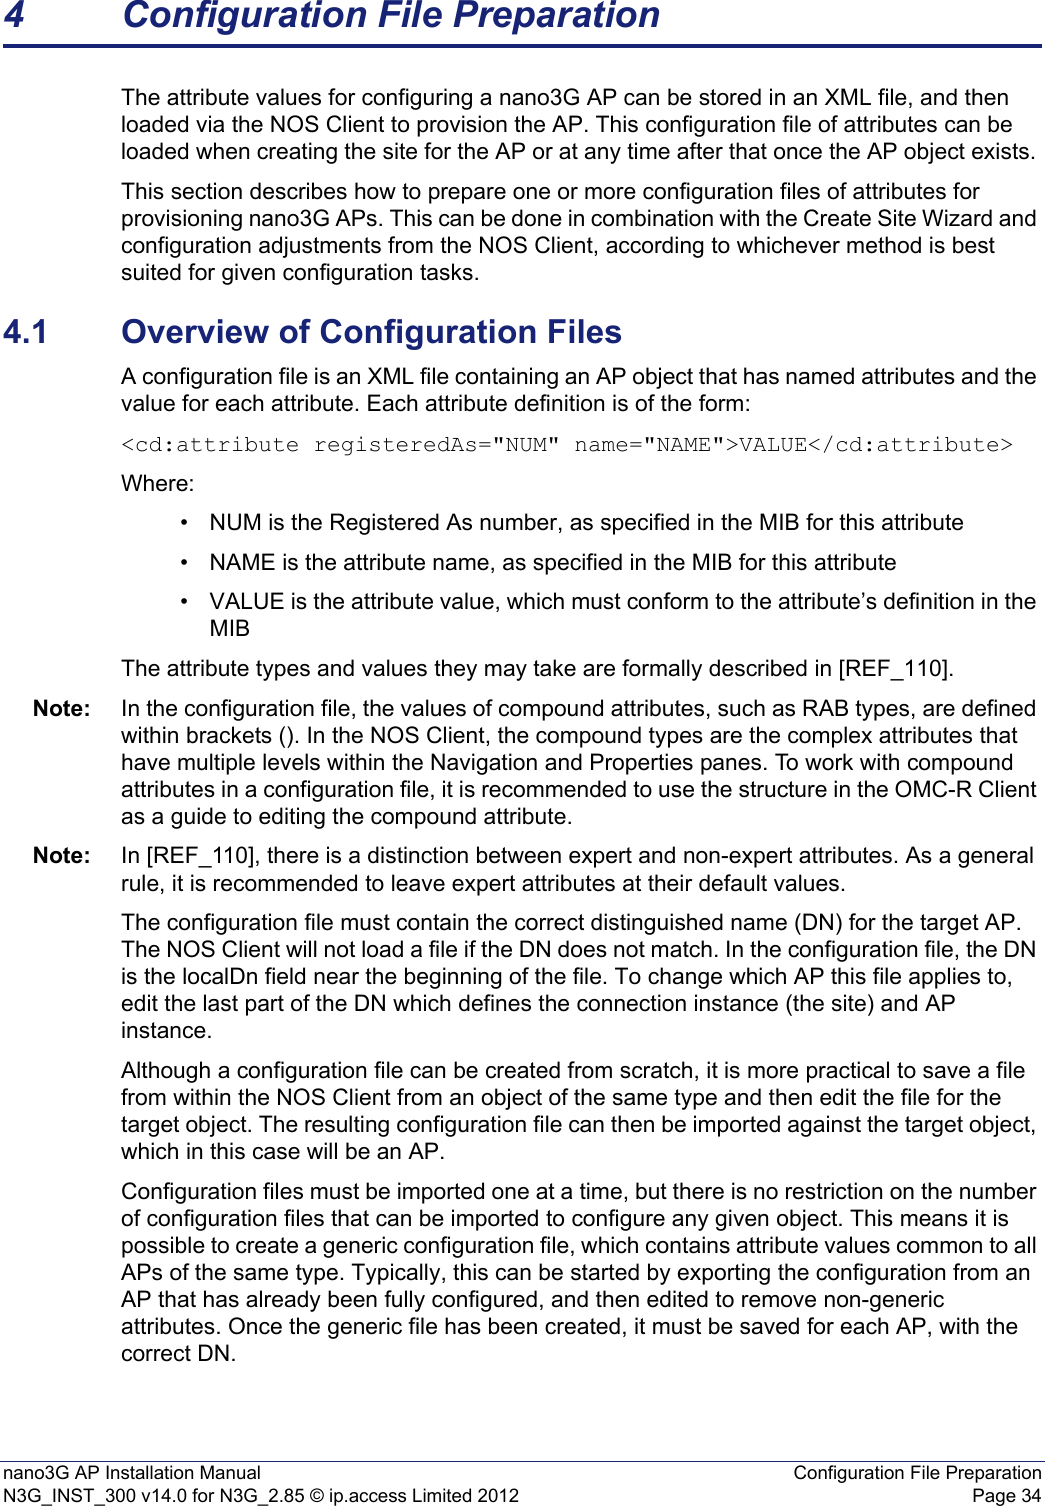 nano3G AP Installation Manual Configuration File PreparationN3G_INST_300 v14.0 for N3G_2.85 © ip.access Limited 2012 Page 344 Configuration File PreparationThe attribute values for configuring a nano3G AP can be stored in an XML file, and then loaded via the NOS Client to provision the AP. This configuration file of attributes can be loaded when creating the site for the AP or at any time after that once the AP object exists. This section describes how to prepare one or more configuration files of attributes for provisioning nano3G APs. This can be done in combination with the Create Site Wizard and configuration adjustments from the NOS Client, according to whichever method is best suited for given configuration tasks. 4.1 Overview of Configuration FilesA configuration file is an XML file containing an AP object that has named attributes and the value for each attribute. Each attribute definition is of the form:&lt;cd:attribute registeredAs=&quot;NUM&quot; name=&quot;NAME&quot;&gt;VALUE&lt;/cd:attribute&gt;Where:• NUM is the Registered As number, as specified in the MIB for this attribute• NAME is the attribute name, as specified in the MIB for this attribute• VALUE is the attribute value, which must conform to the attribute’s definition in the MIBThe attribute types and values they may take are formally described in [REF_110]. Note: In the configuration file, the values of compound attributes, such as RAB types, are defined within brackets (). In the NOS Client, the compound types are the complex attributes that have multiple levels within the Navigation and Properties panes. To work with compound attributes in a configuration file, it is recommended to use the structure in the OMC-R Client as a guide to editing the compound attribute.Note: In [REF_110], there is a distinction between expert and non-expert attributes. As a general rule, it is recommended to leave expert attributes at their default values. The configuration file must contain the correct distinguished name (DN) for the target AP. The NOS Client will not load a file if the DN does not match. In the configuration file, the DN is the localDn field near the beginning of the file. To change which AP this file applies to, edit the last part of the DN which defines the connection instance (the site) and AP instance.Although a configuration file can be created from scratch, it is more practical to save a file from within the NOS Client from an object of the same type and then edit the file for the target object. The resulting configuration file can then be imported against the target object, which in this case will be an AP.Configuration files must be imported one at a time, but there is no restriction on the number of configuration files that can be imported to configure any given object. This means it is possible to create a generic configuration file, which contains attribute values common to all APs of the same type. Typically, this can be started by exporting the configuration from an AP that has already been fully configured, and then edited to remove non-generic attributes. Once the generic file has been created, it must be saved for each AP, with the correct DN.